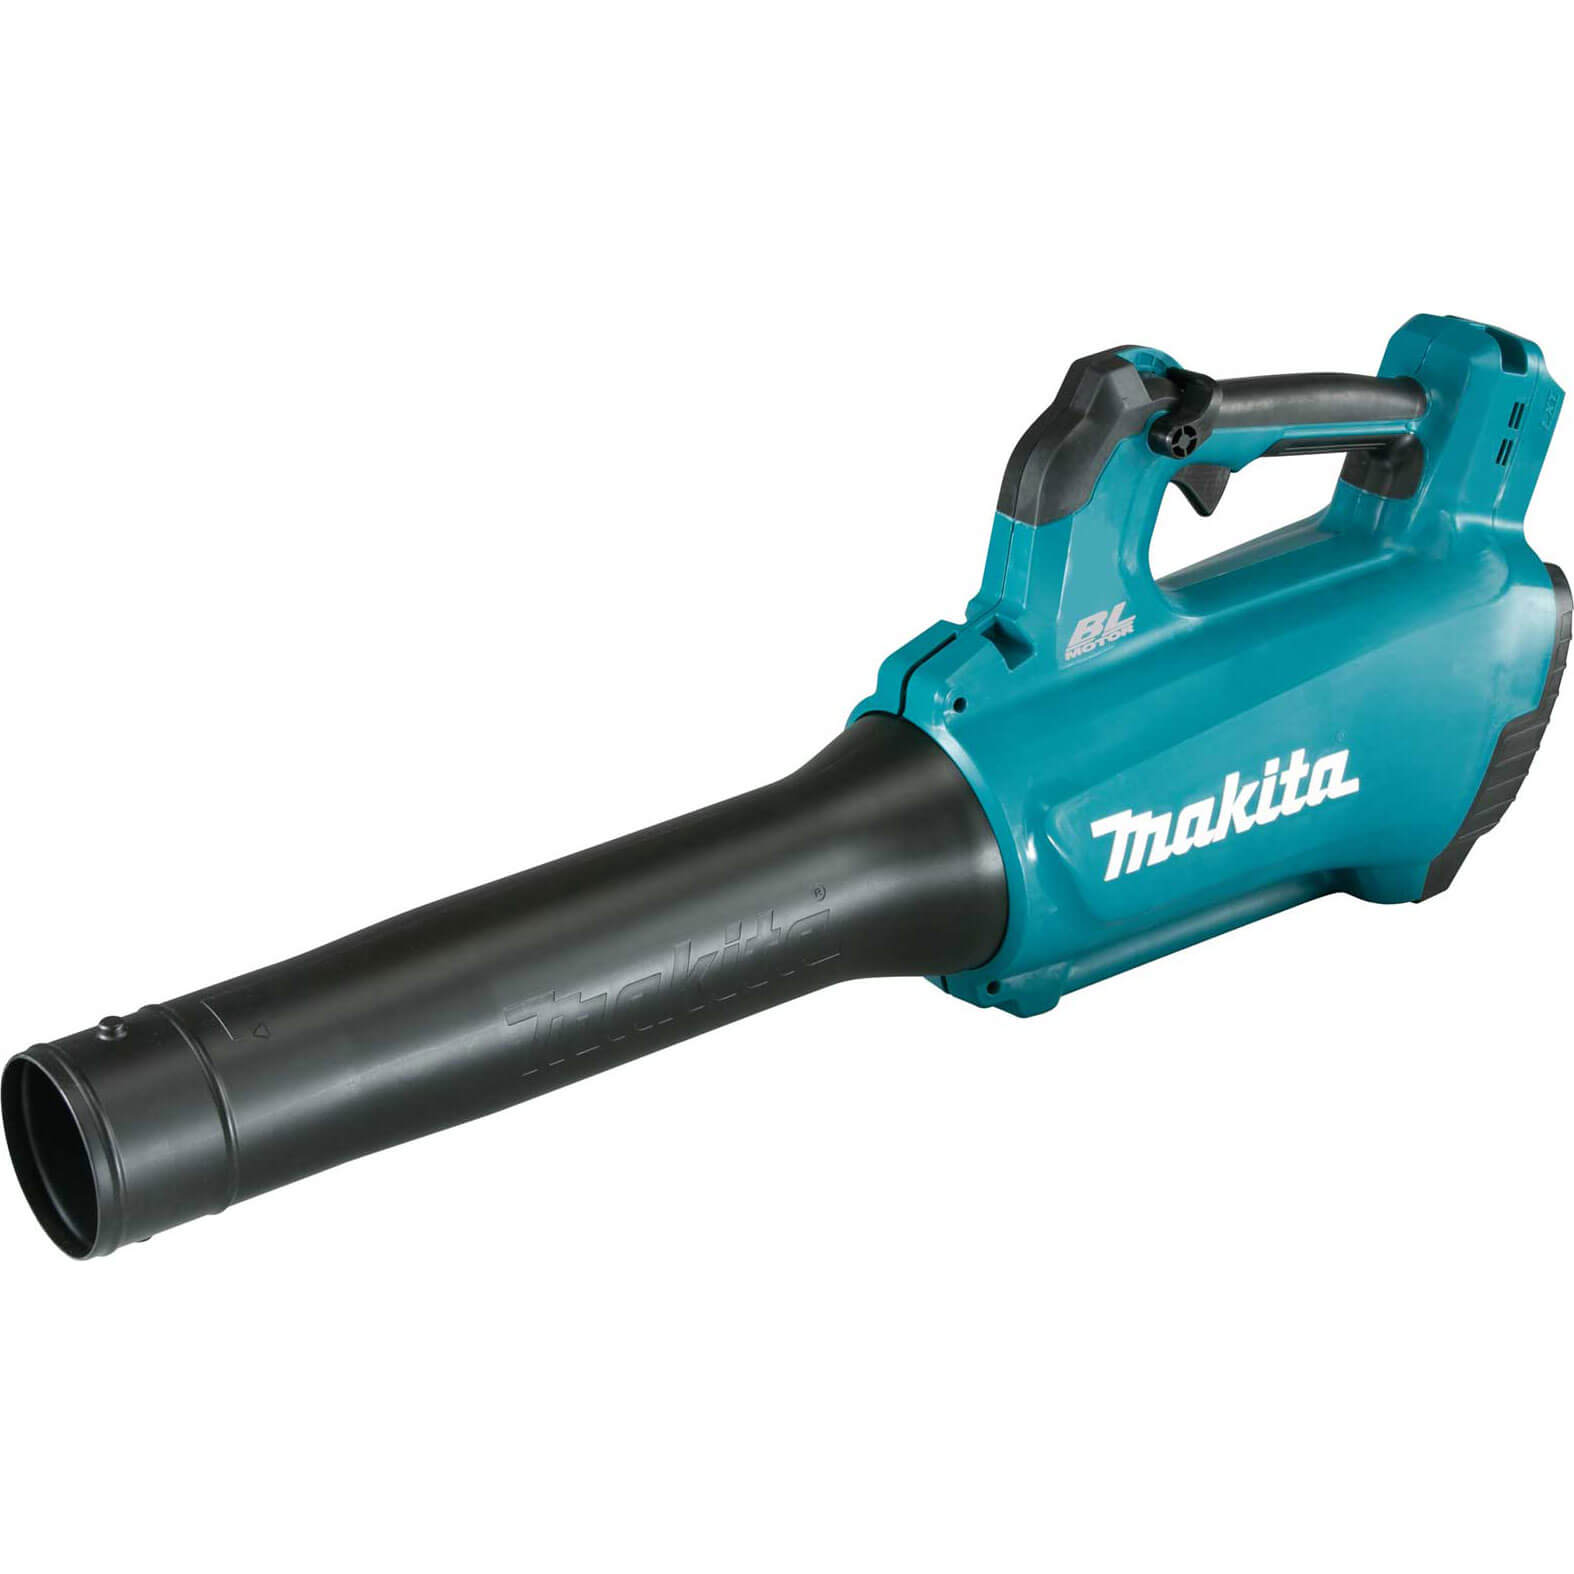 Image of Makita DUB184 18v LXT Cordless Brushless Garden Blower No Batteries No Charger